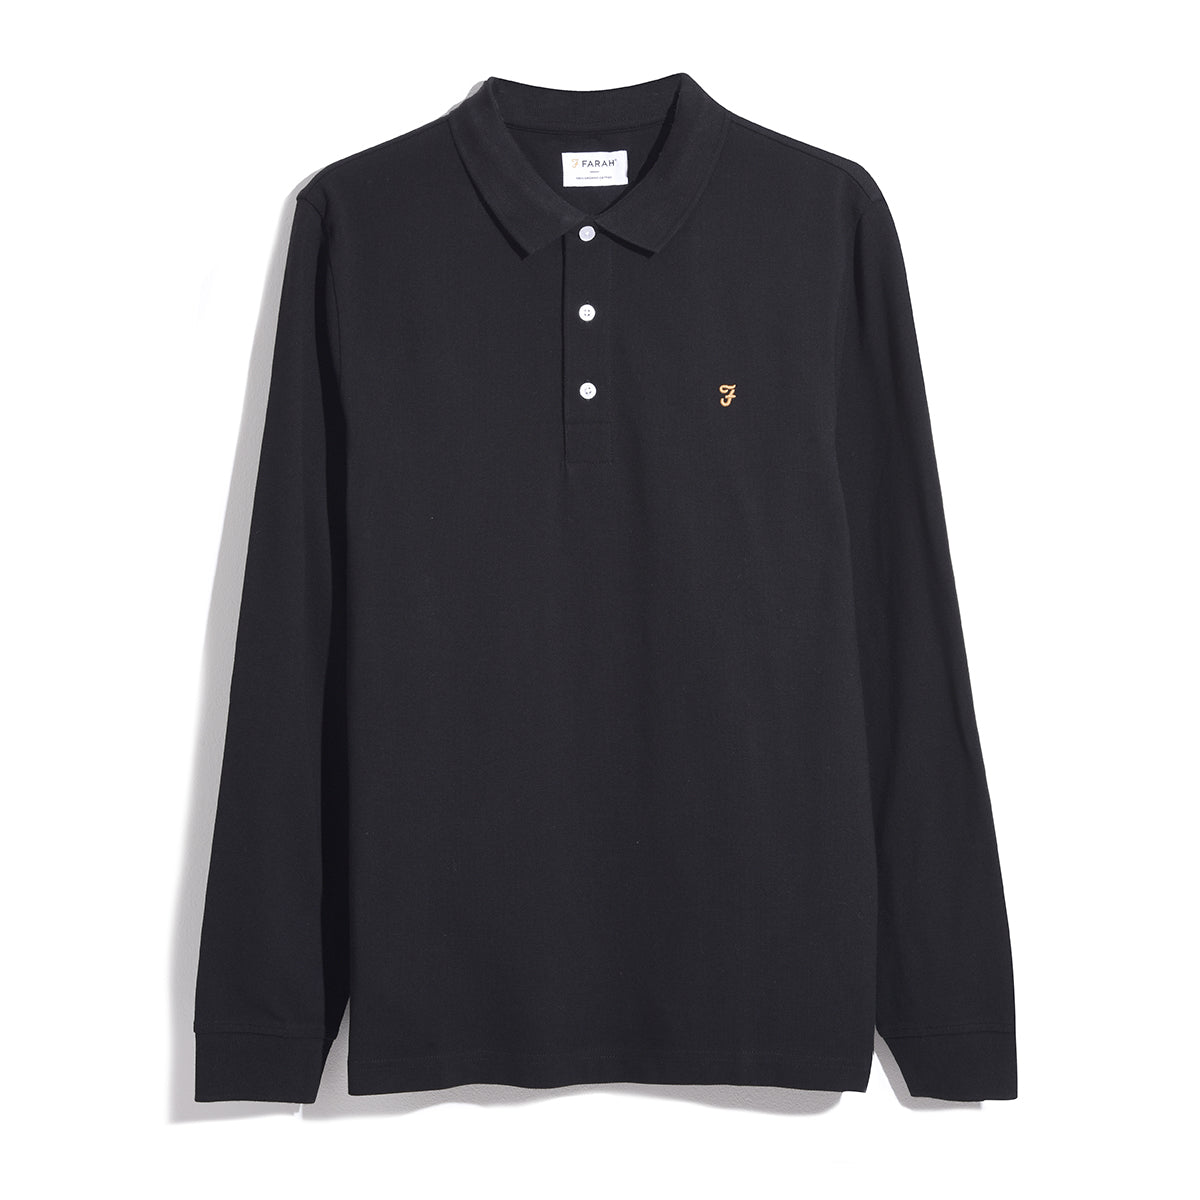 View Blanes Organic Cotton Long Sleeve Polo Shirt In Black information